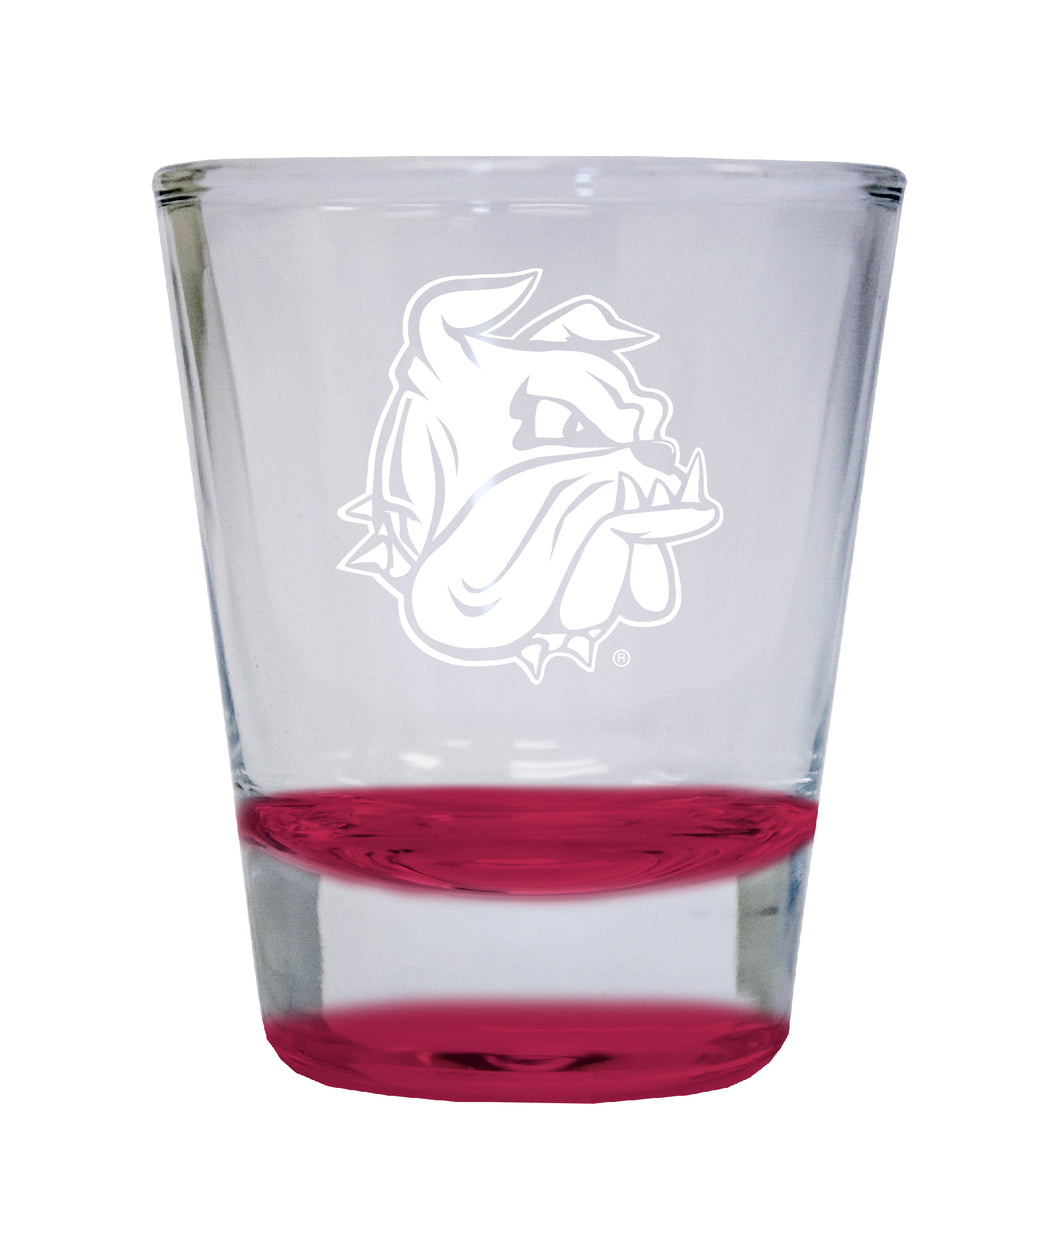 Minnesota Duluth Bulldogs Etched Round Shot Glass 2 oz Red